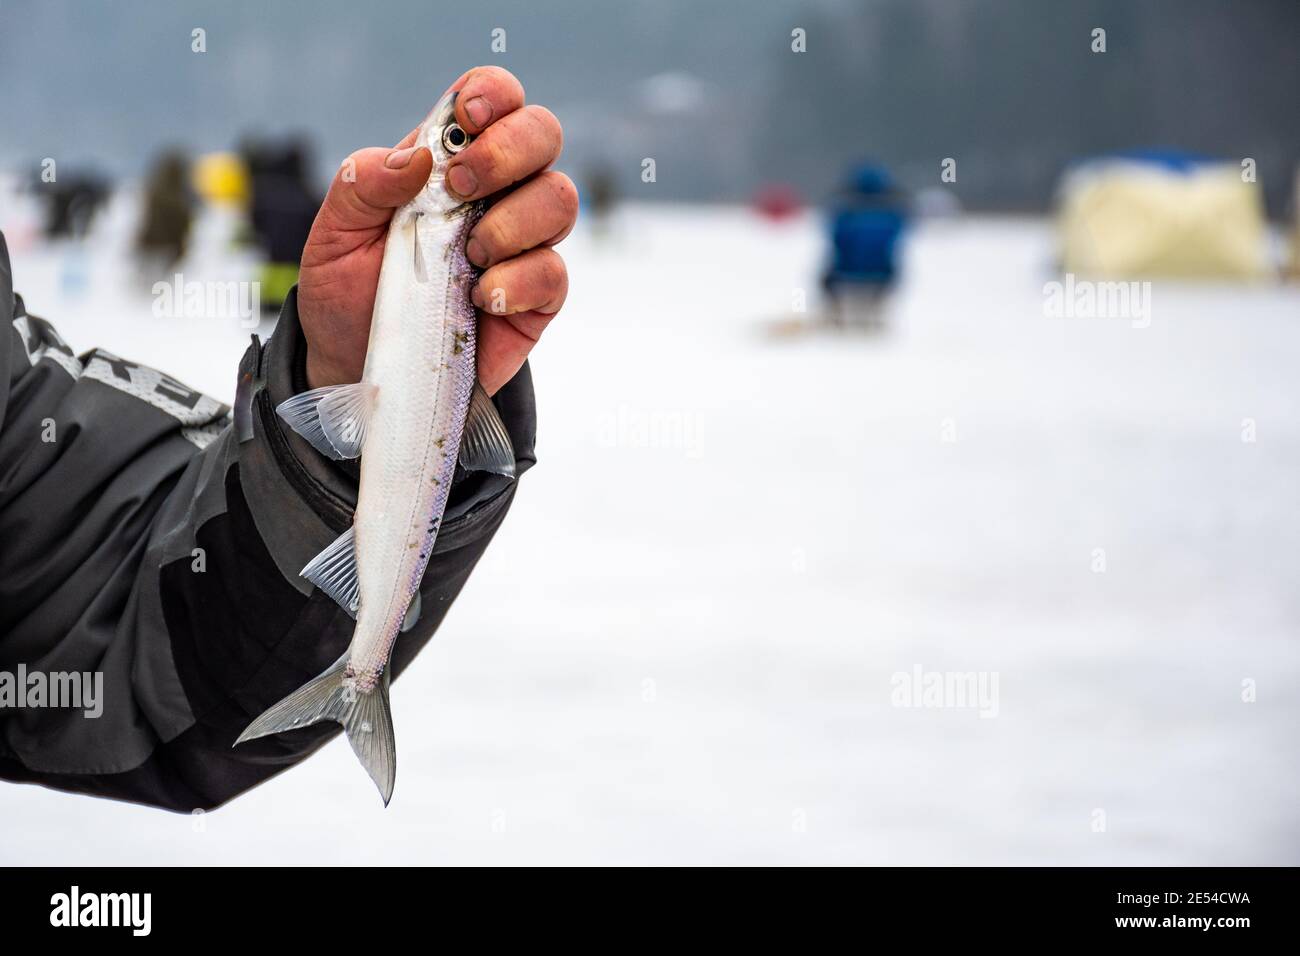 Fisherman fishing on a frozen lake in winter showing a coregonus albula fish, known as the vendace or as the European cisco, freshwater whitefis Stock Photo